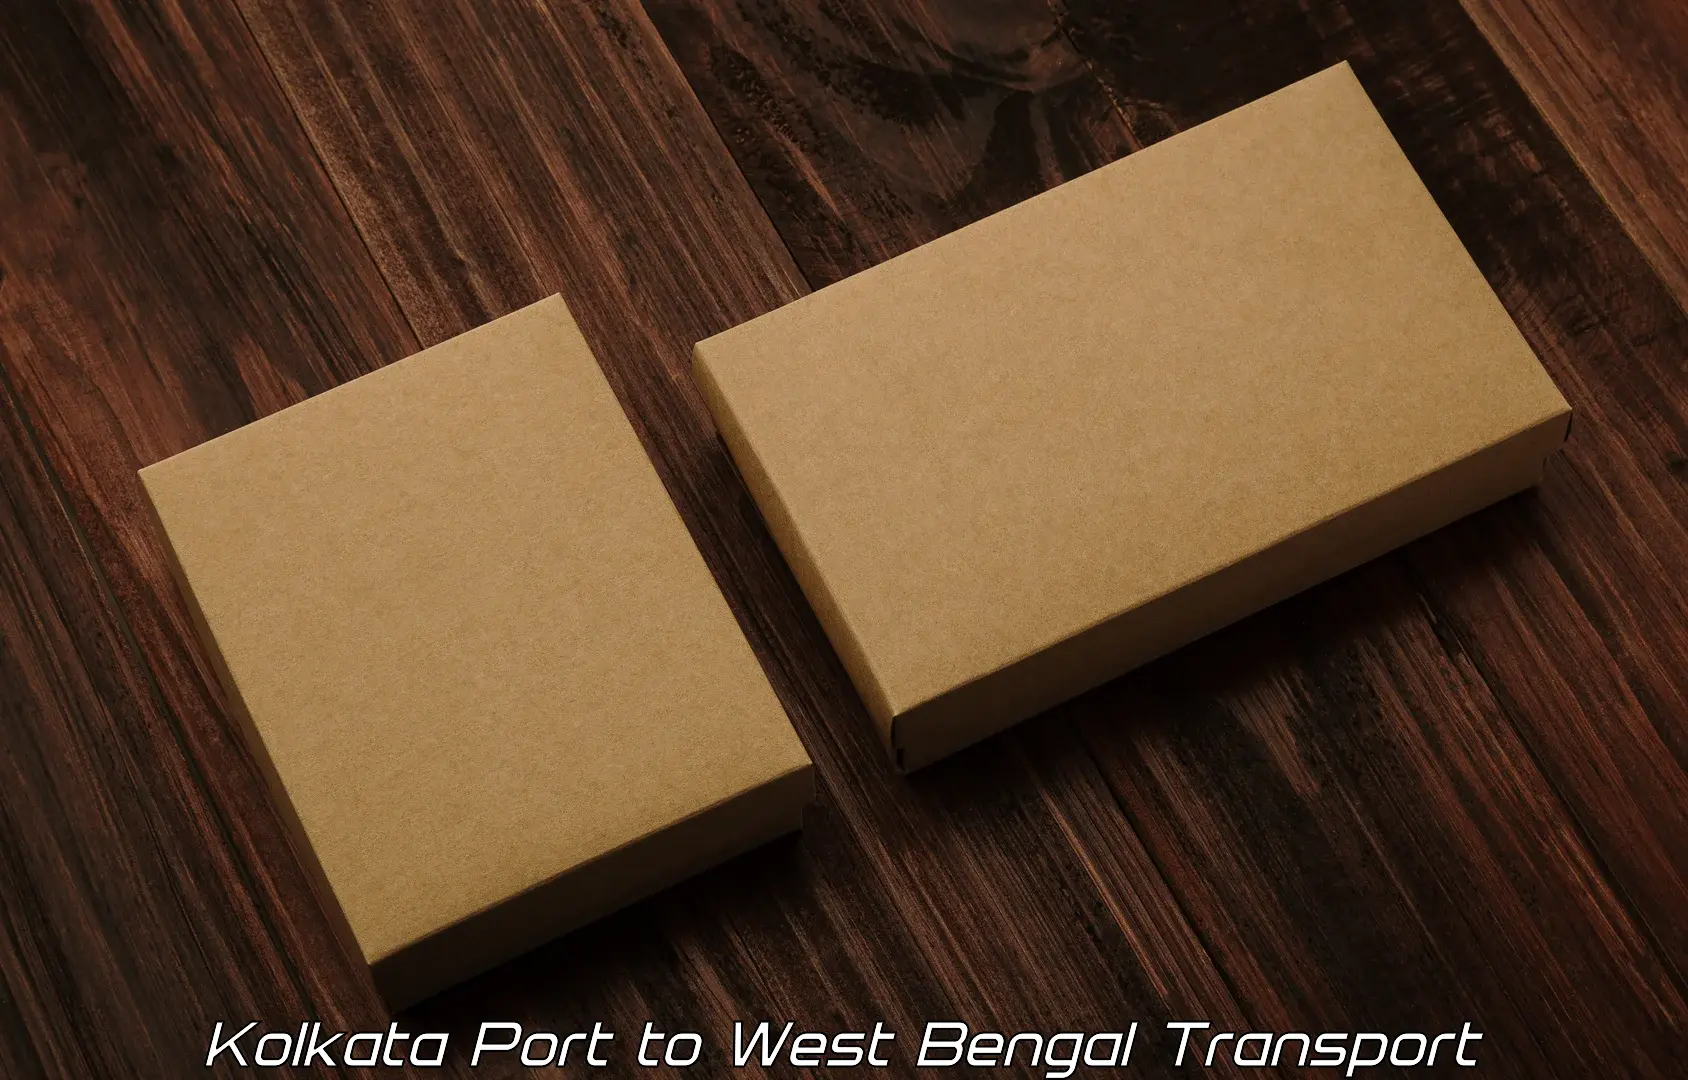 Transport bike from one state to another Kolkata Port to Chinsurah